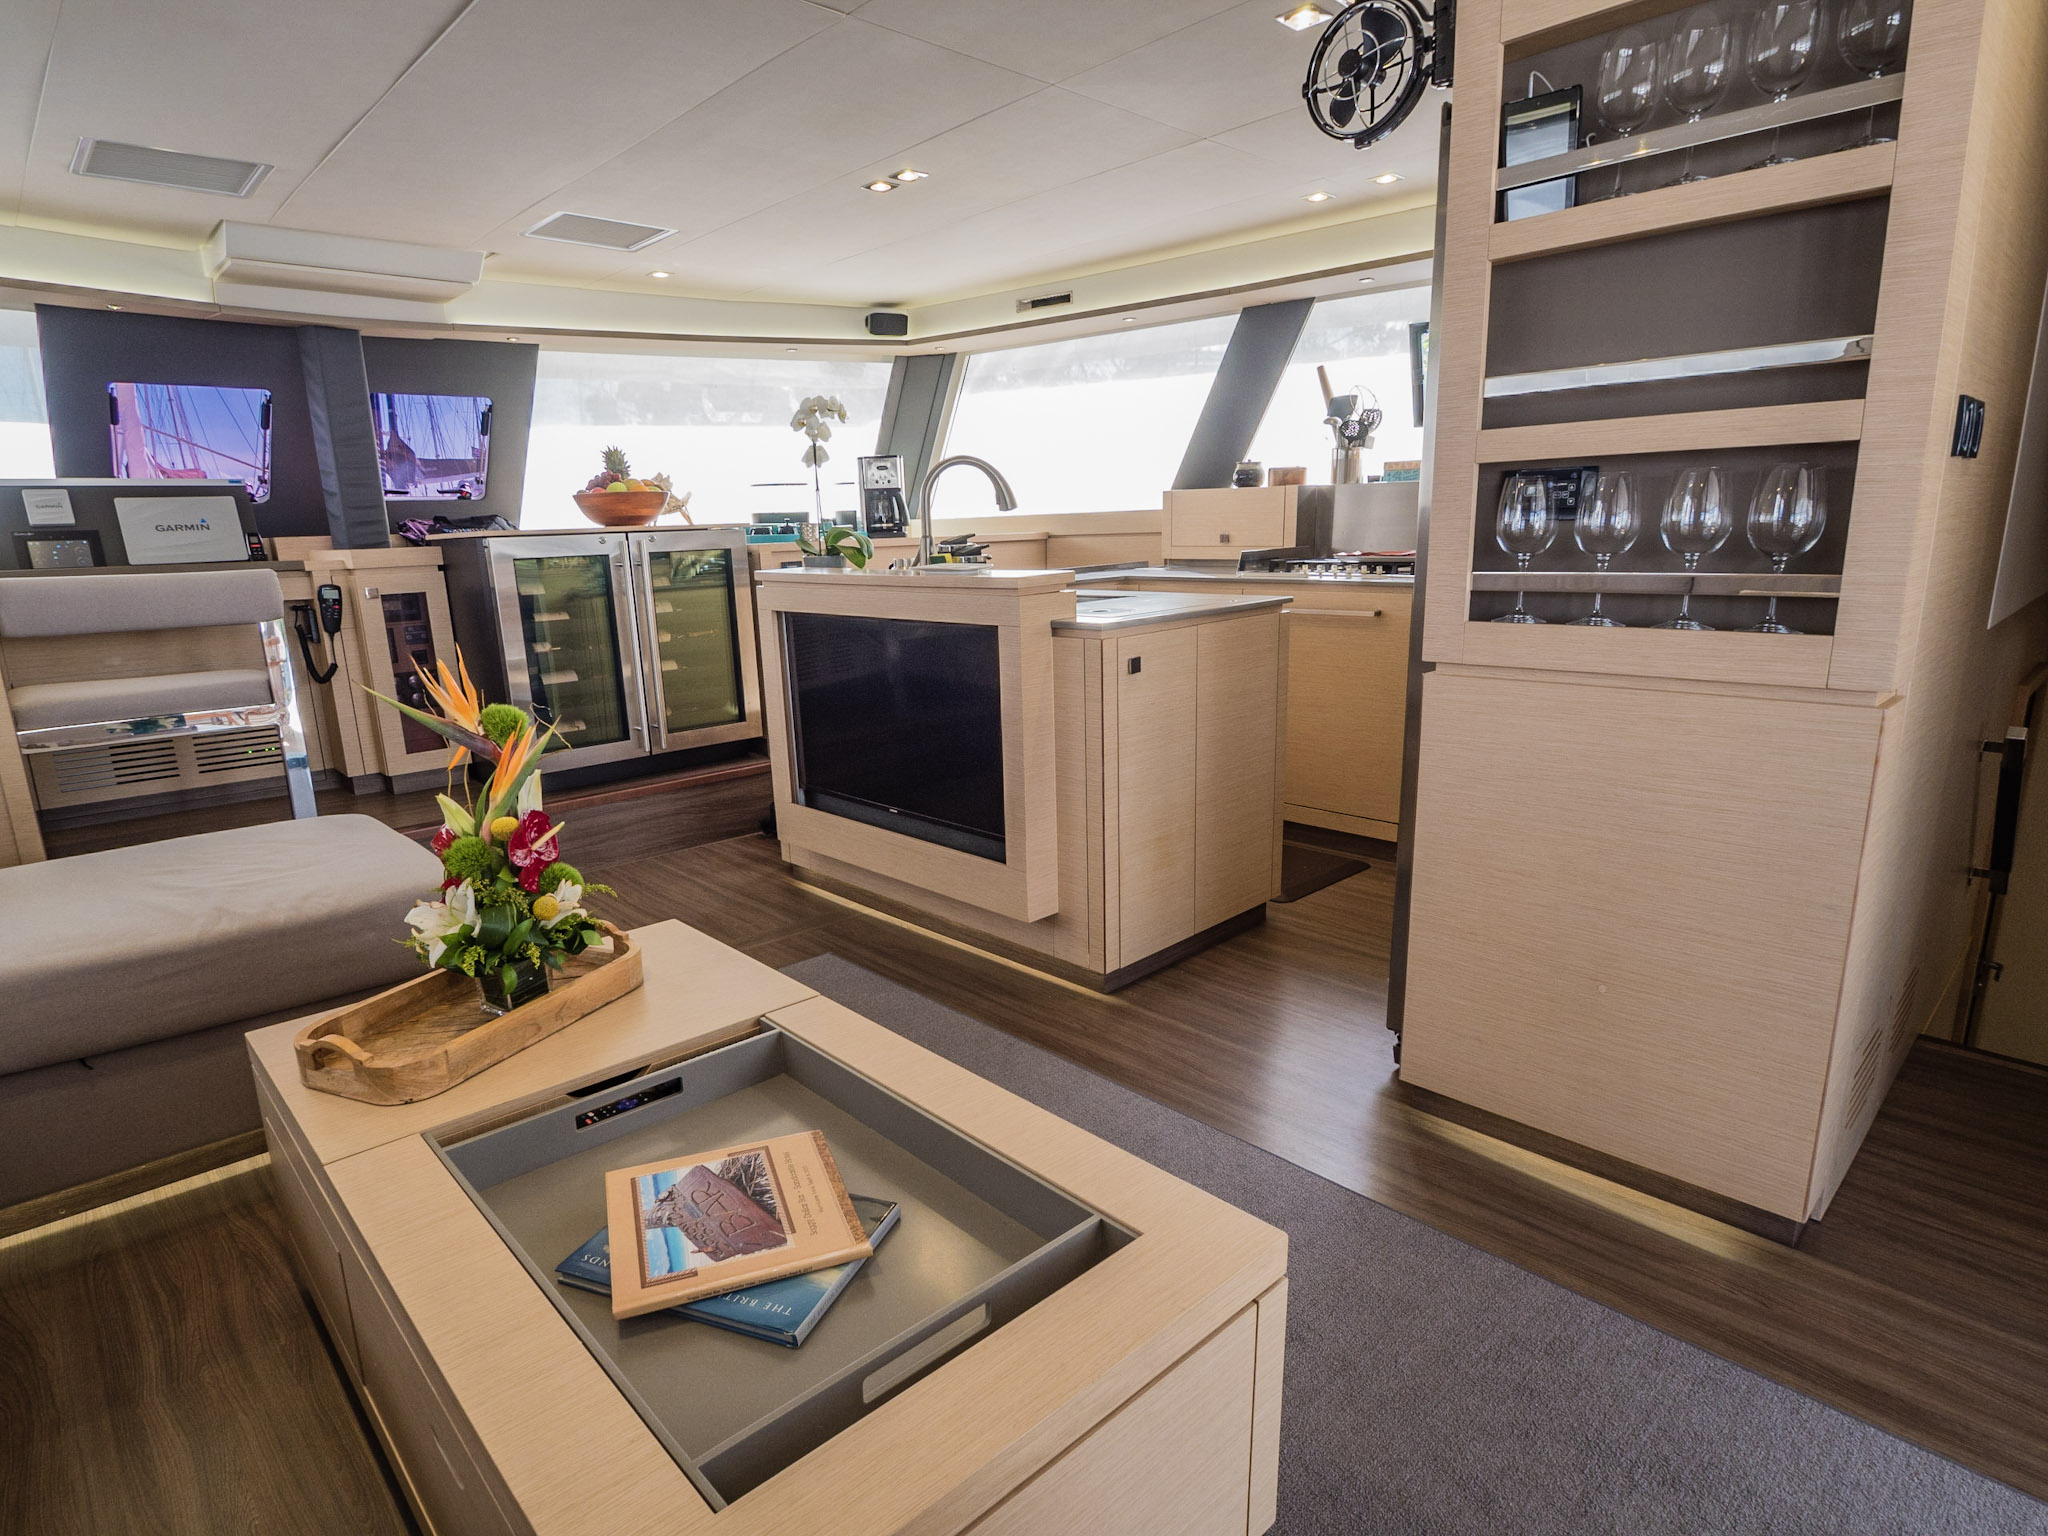 See Why People Rave over PORT TO VINO an Outstanding BVI Catamaran Charter